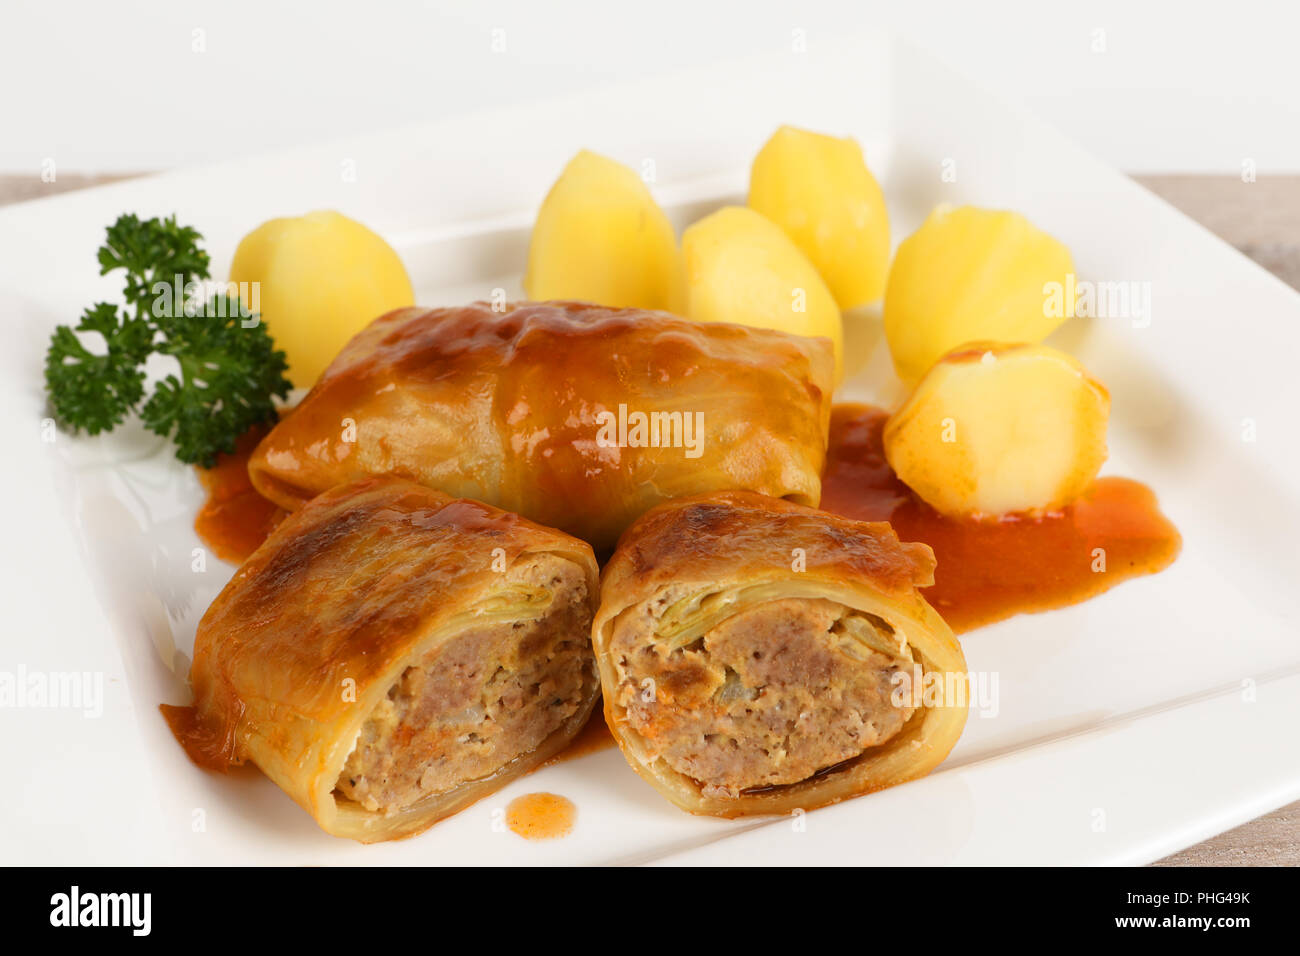 cabbage roulade with potatoes Stock Photo